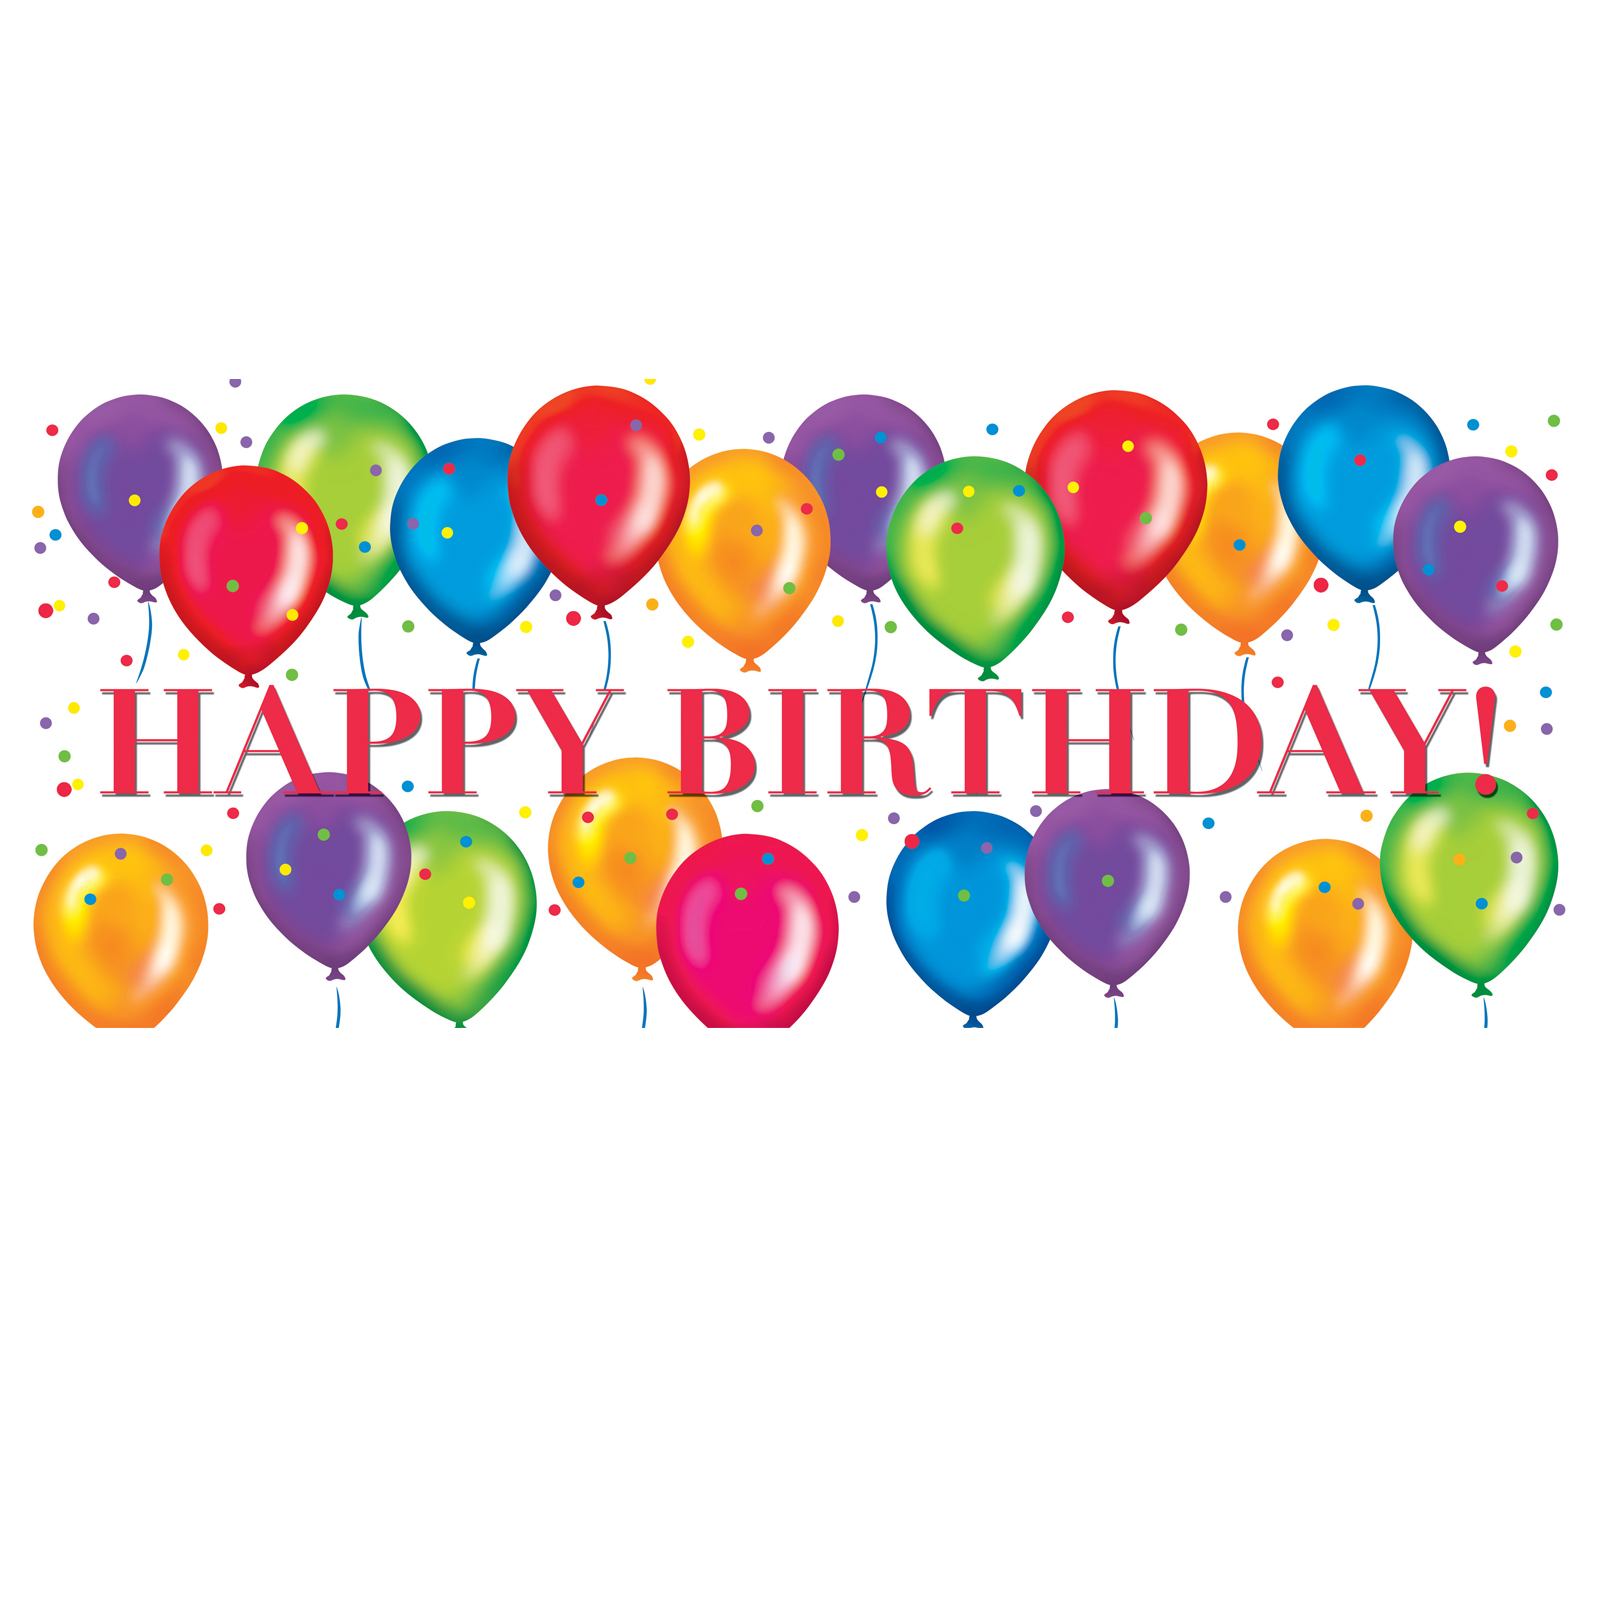 Image of Belated Birthday Clipart #4487, Free Birthday Clip Art ...